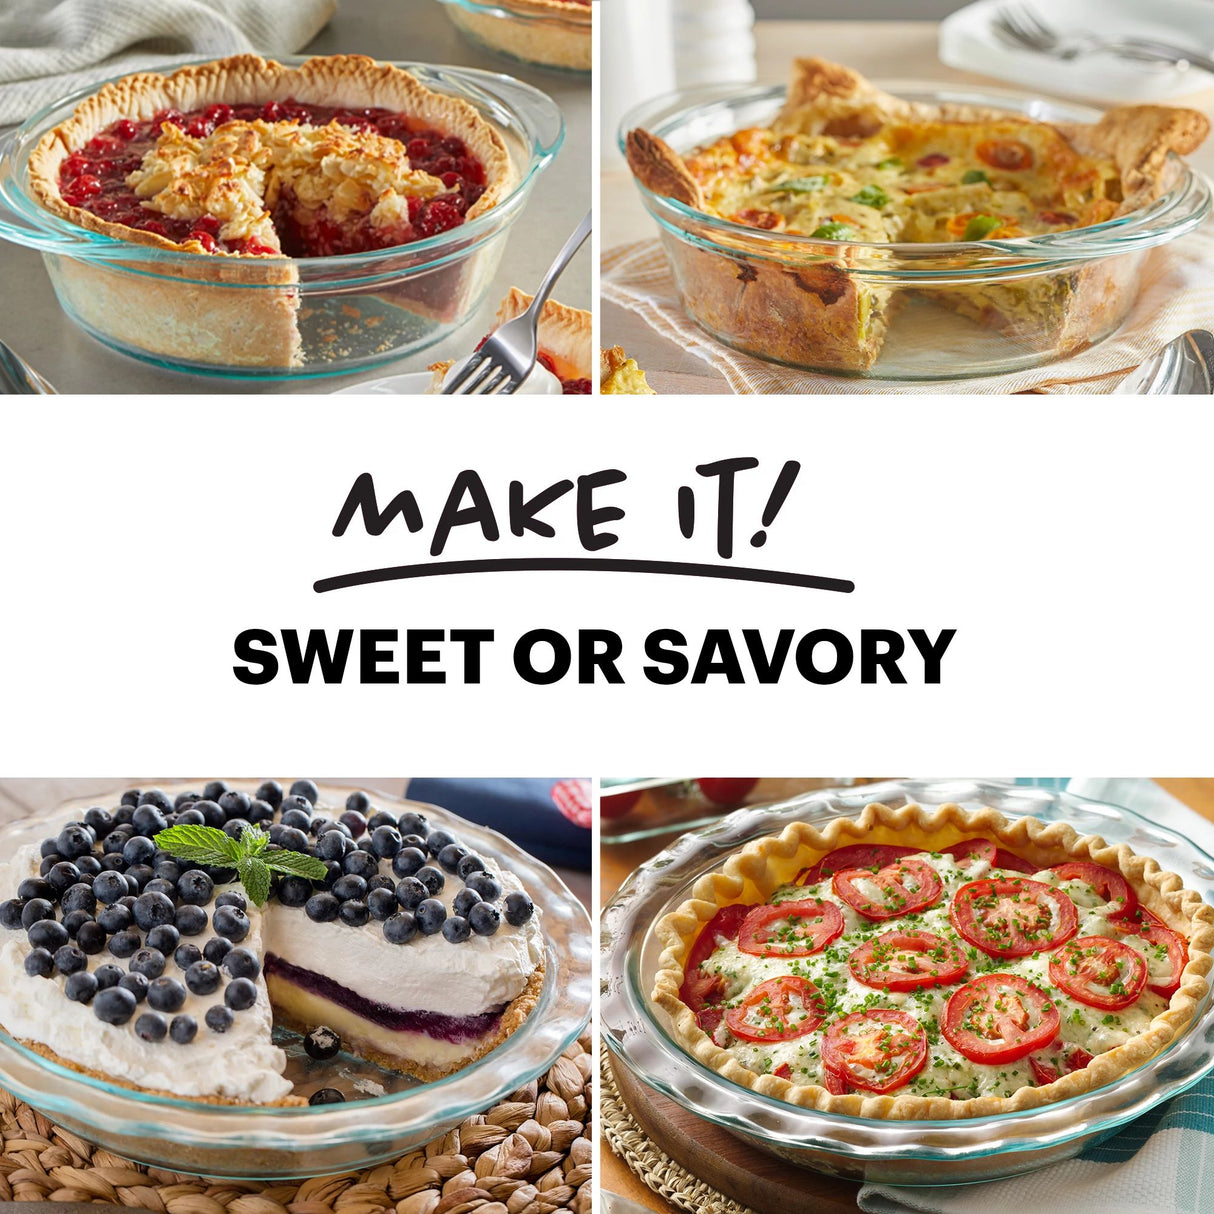  image shows pie plates with text make it sweet or savory